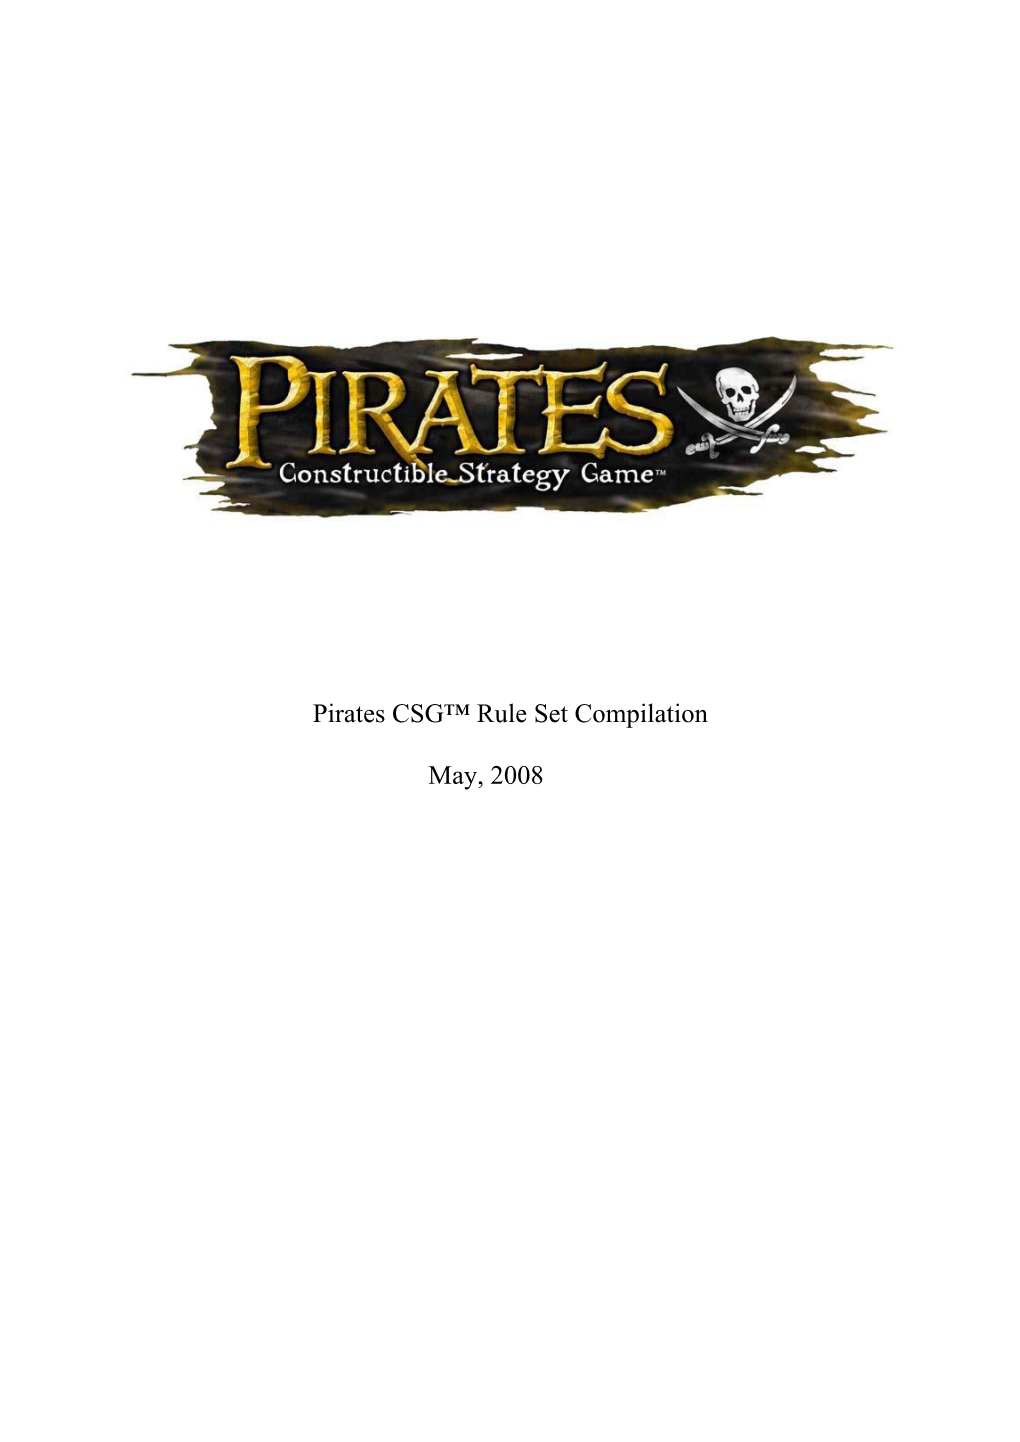 Pirates CSG™ Rule Set Compilation May, 2008